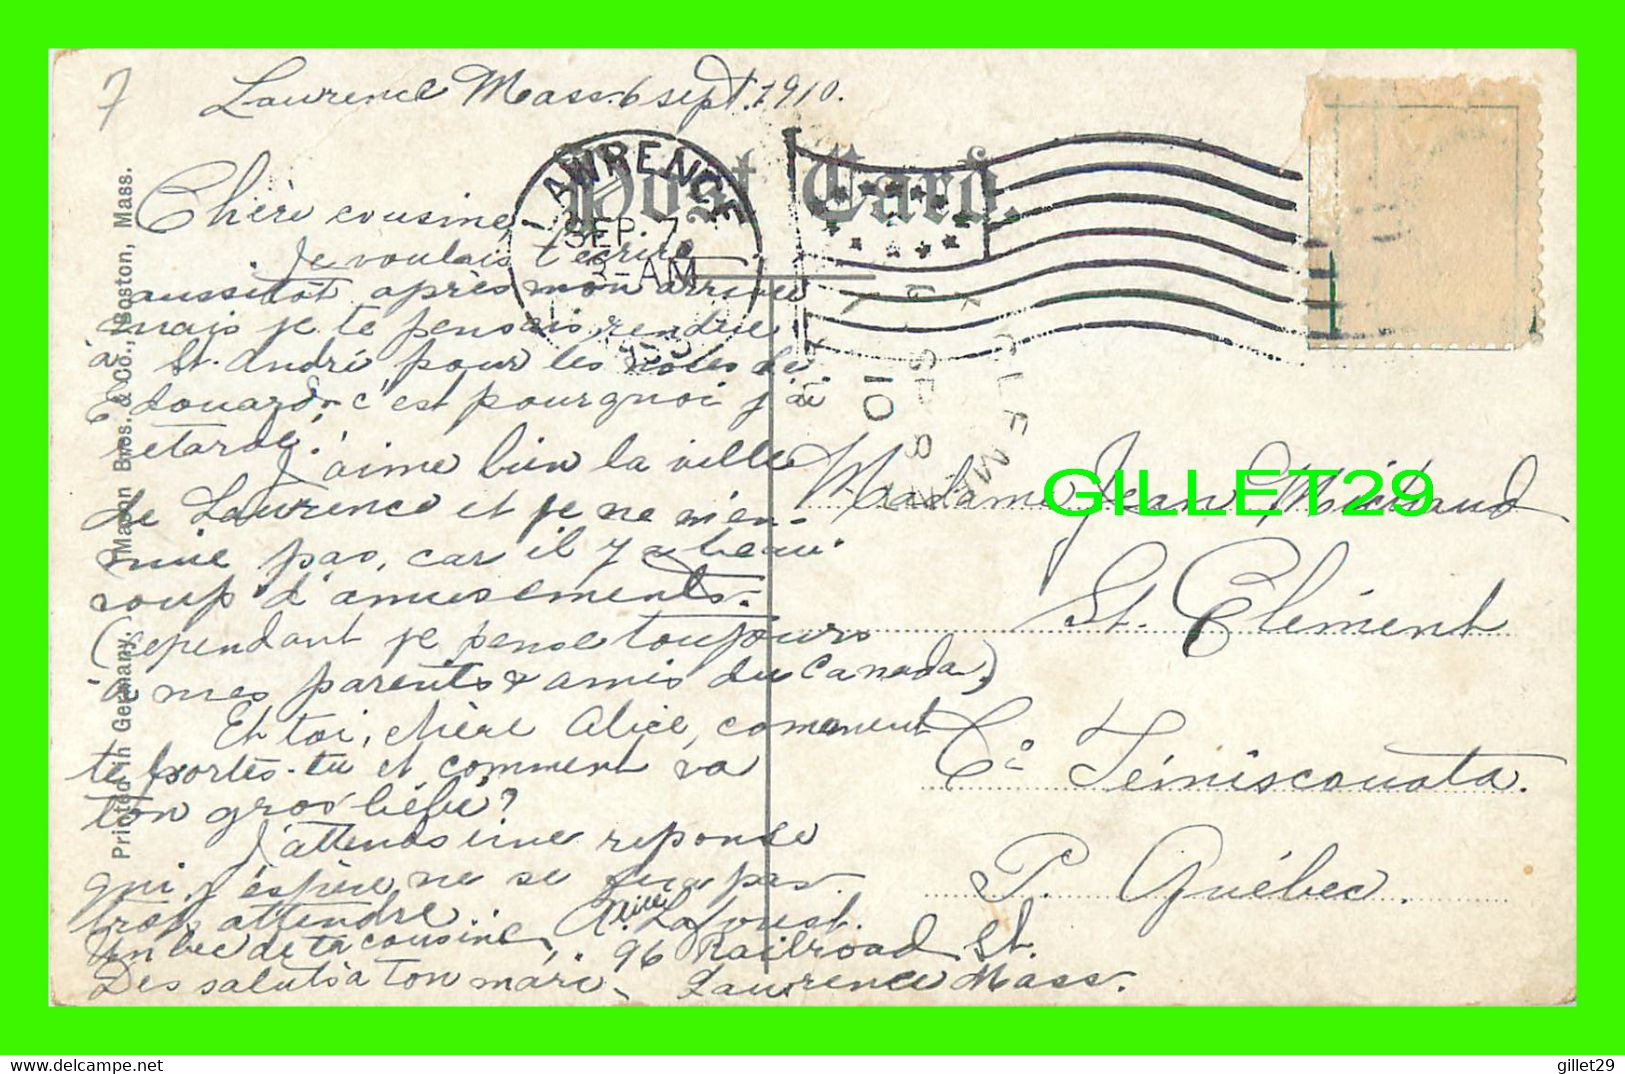 LAWRENCE, MA - GREETINGS FROM LAWRENCE, MA - MUTLVUES - TRAVEL IN 1920 -  MASON BROS & CO - - Lawrence